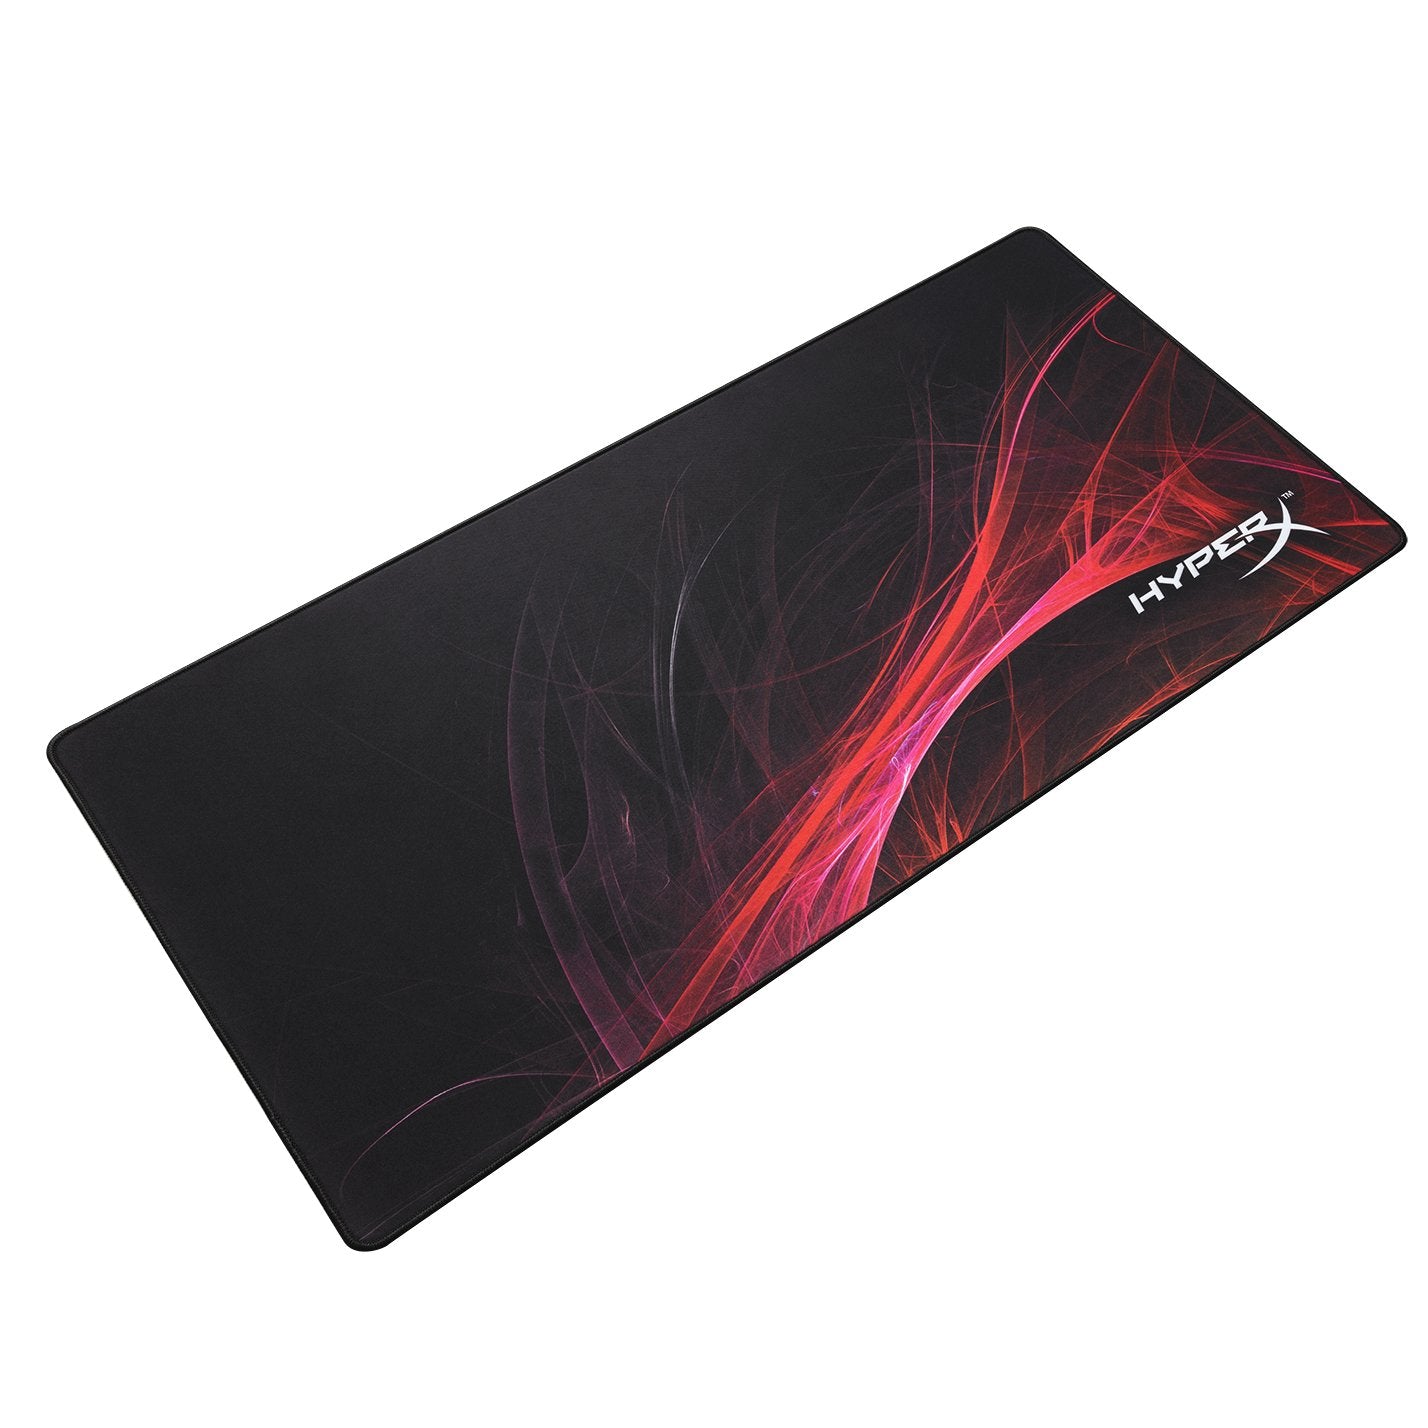 MOUSE-PAD-HYPERX-FURY-S-SPEED---EXTRA-LARGE-(HX-MPFS-S-XL)